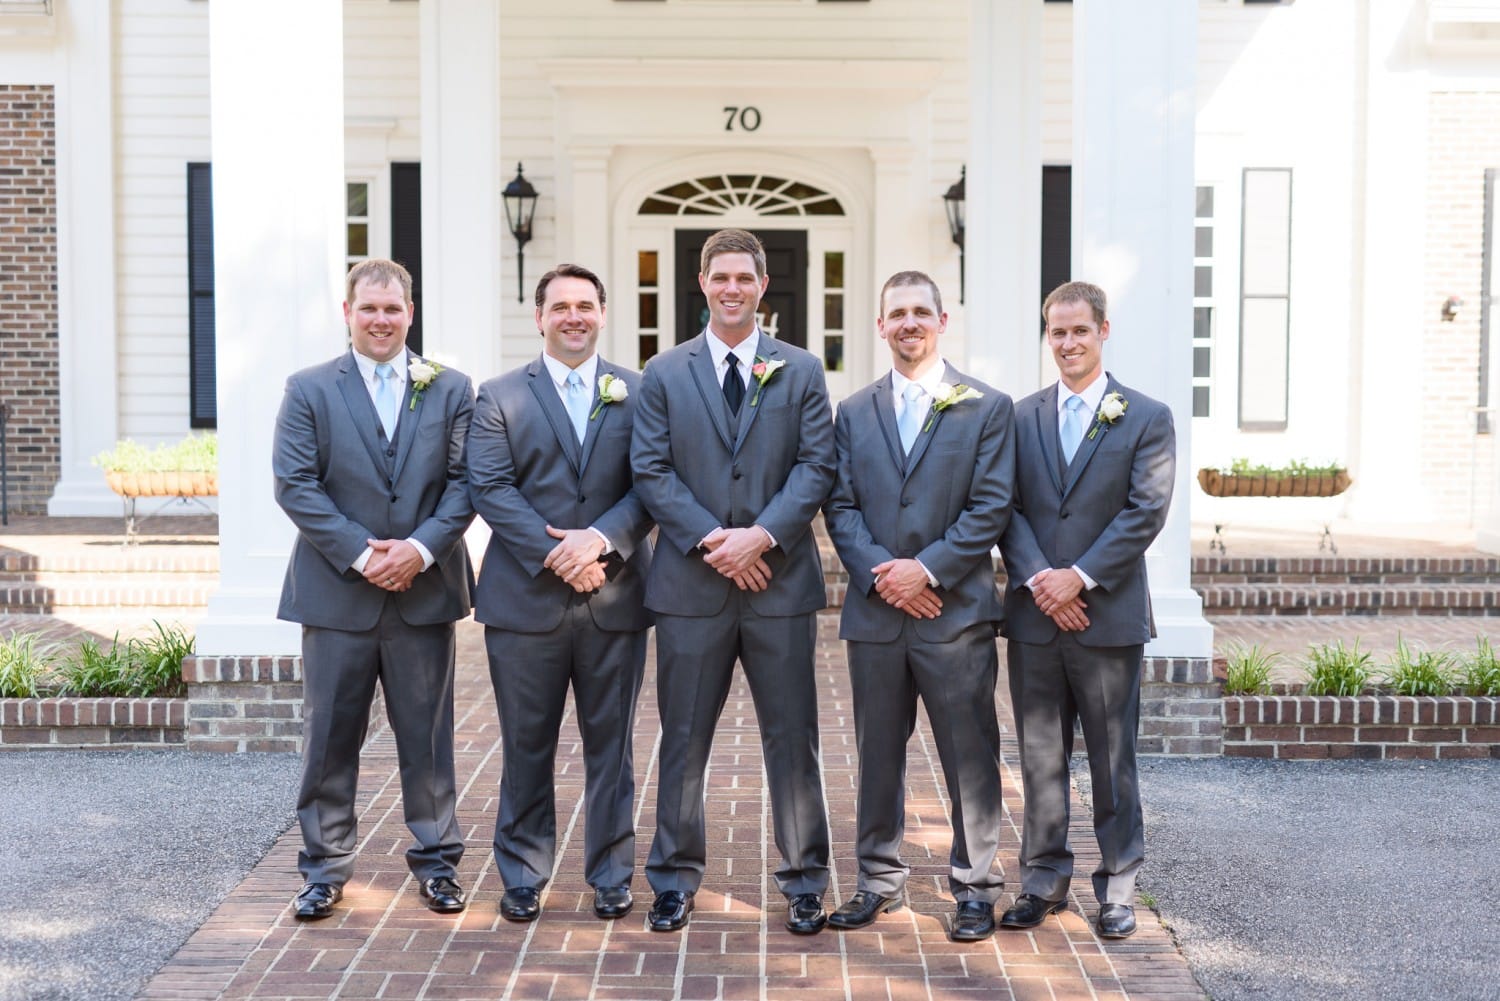 Groomsmen standing in front of the golf clubhouse - Pawleys Plantation